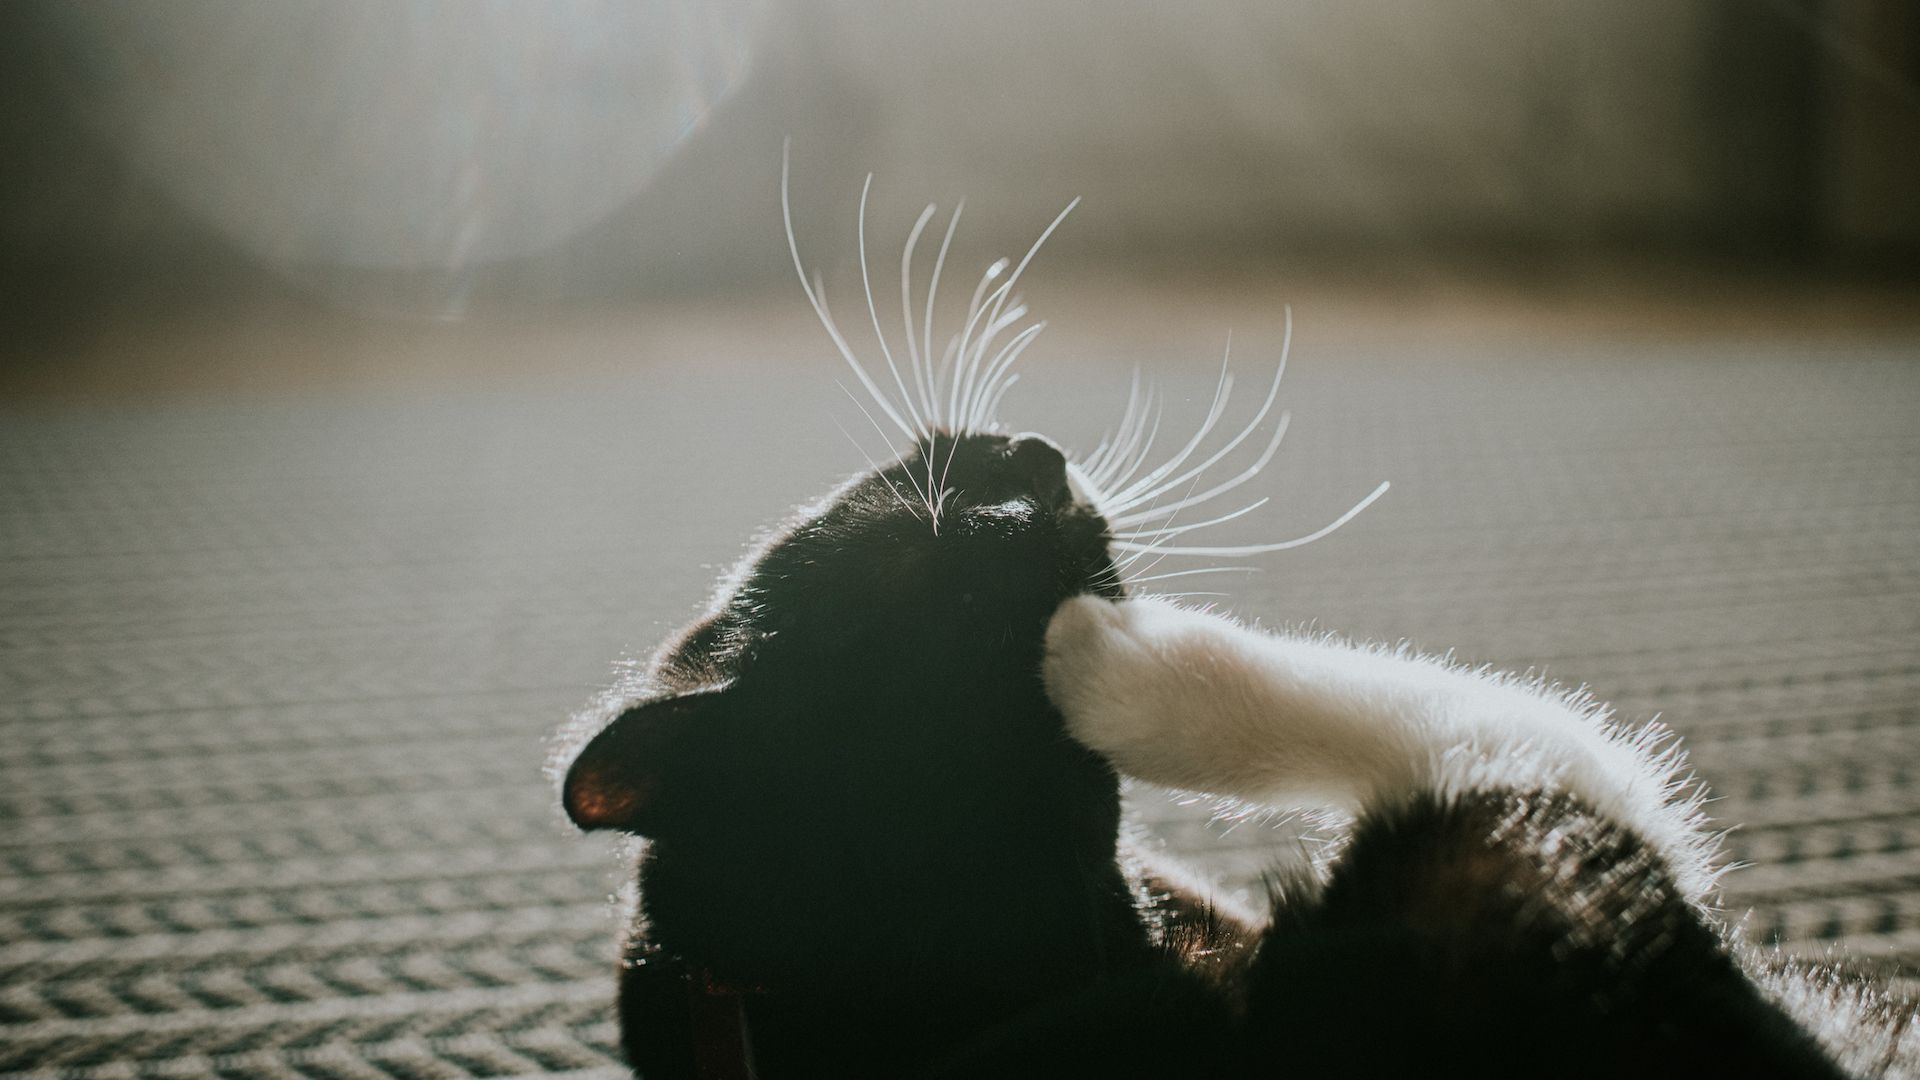 <p>                     Both species are prone to flea infestations, but cats are much more likely, according to several studies, including the Big Flea Project, carried out by the <a href="https://www.bristol.ac.uk/biology/news/2019/1-in-4-cats-and-1-in-7-dogs-carrying-fleas.html" rel="nofollow">University of Bristol</a>. Their study found that one in four cats had fleas, compared to one in seven dogs.                    </p>